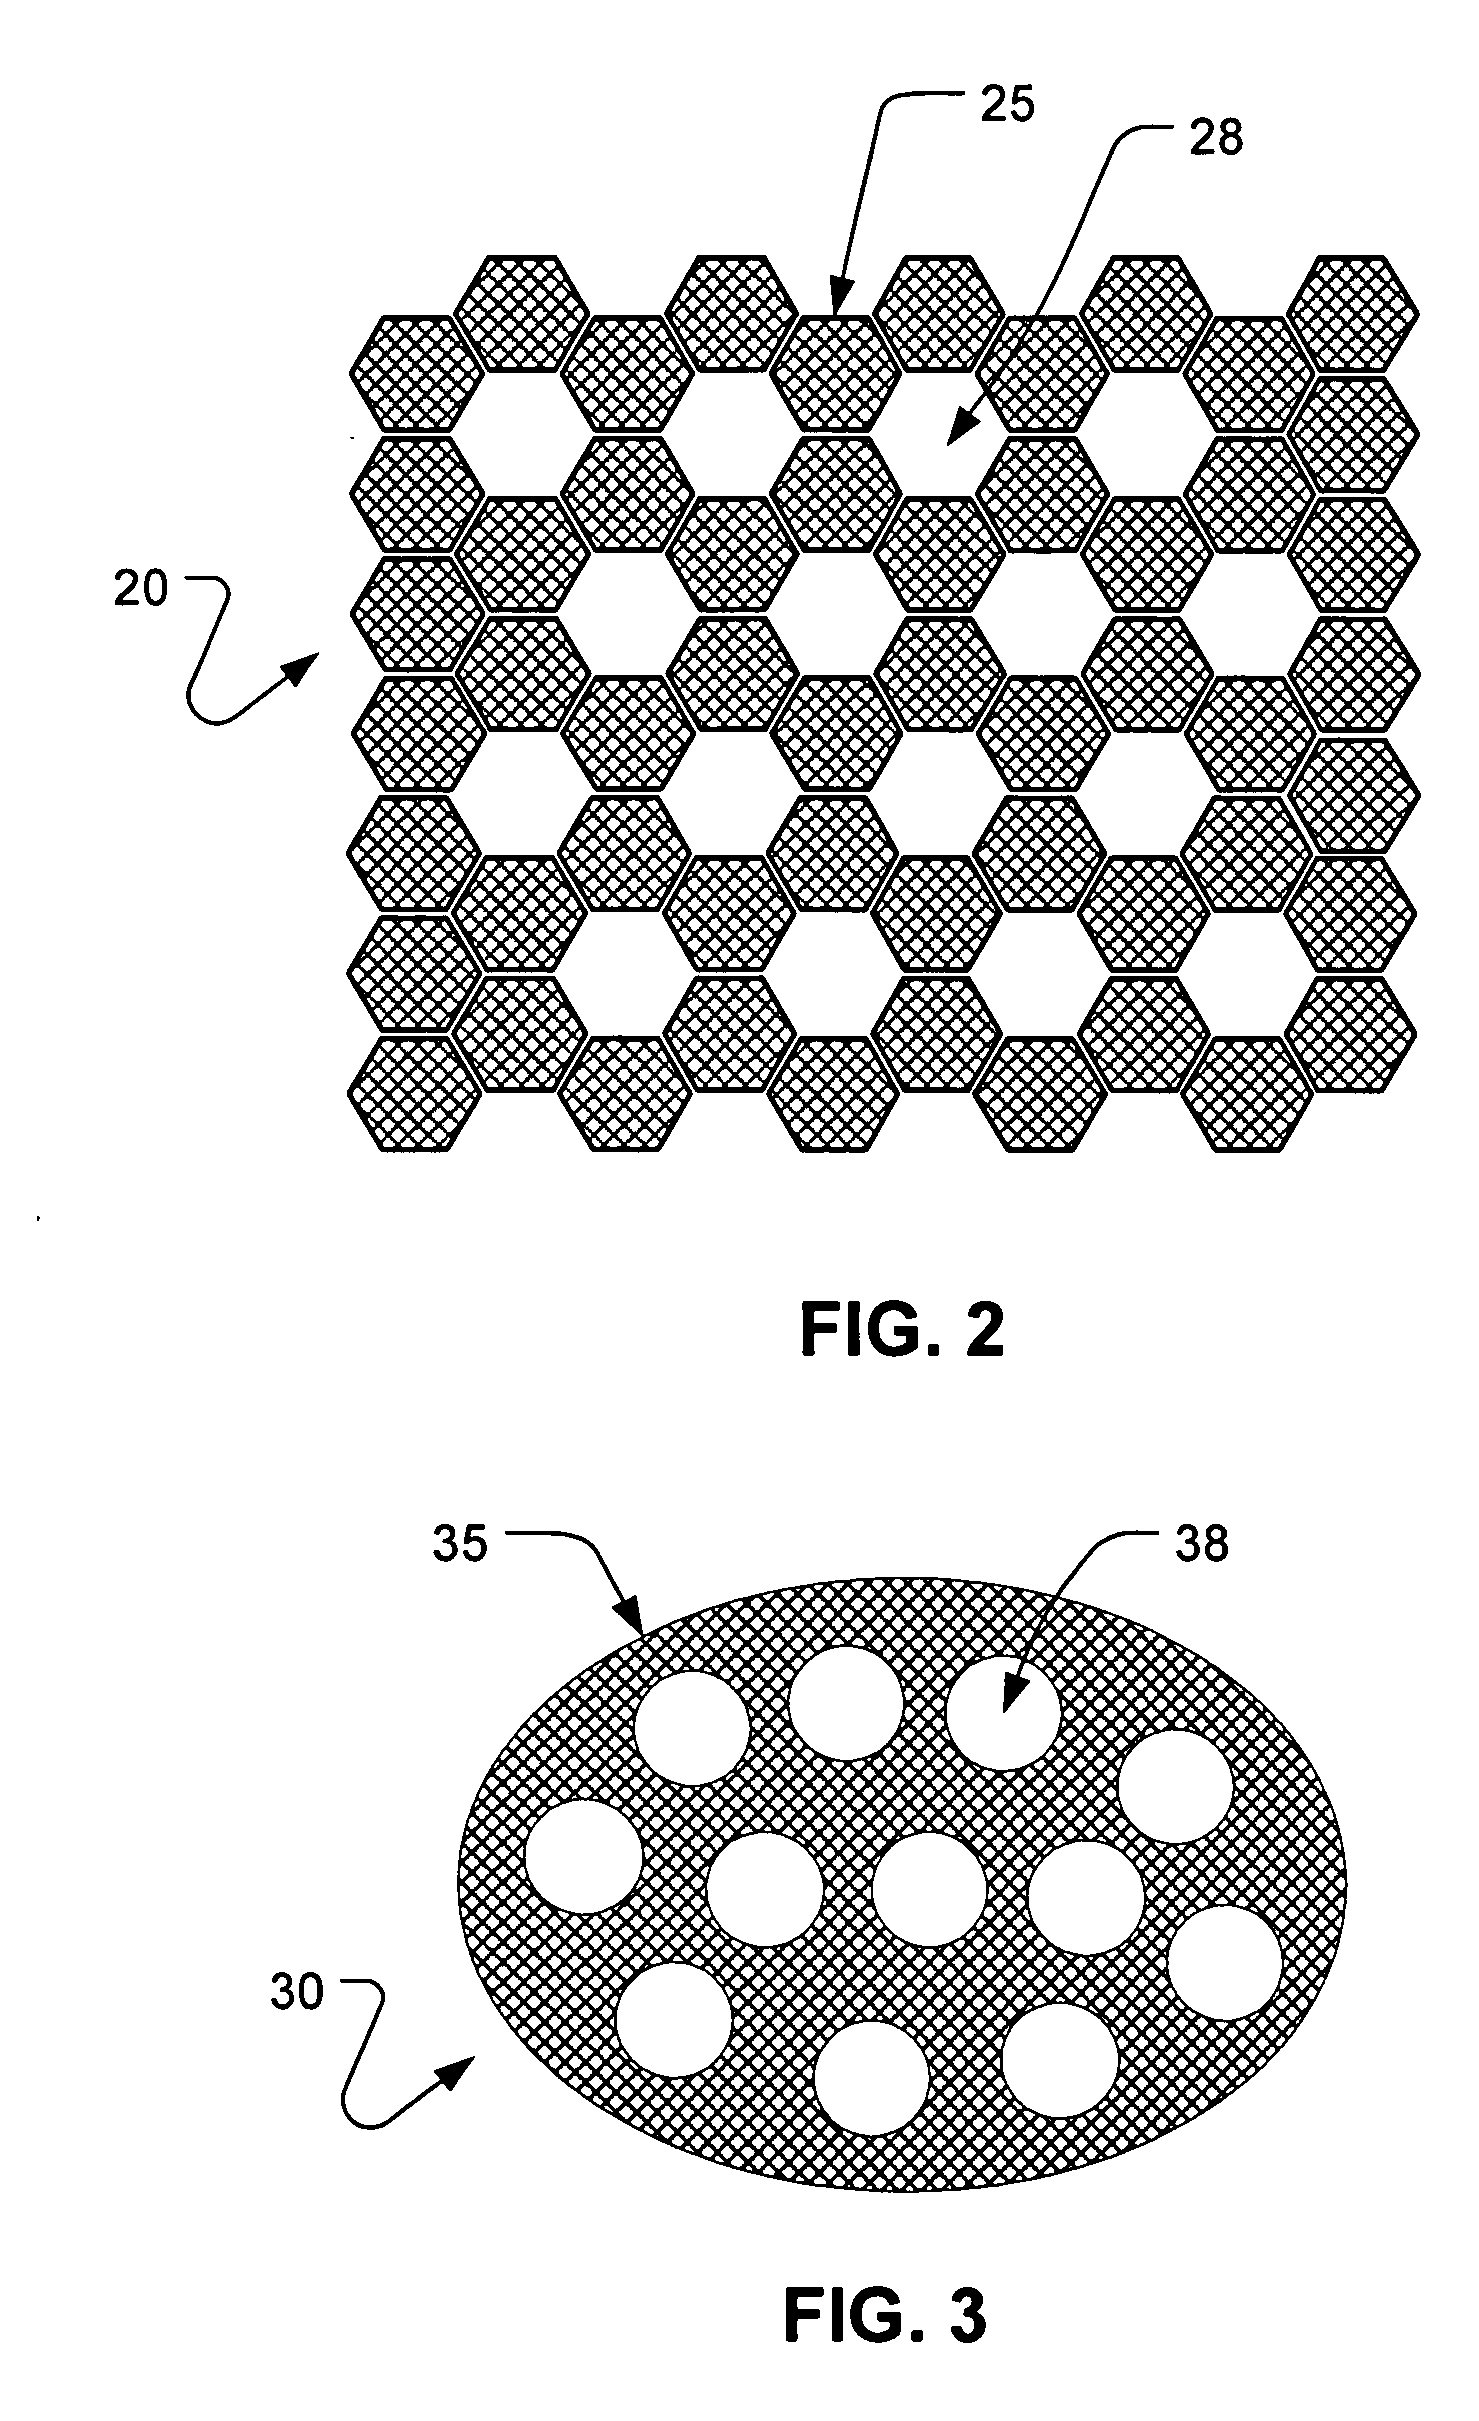 Electrodes for applying an electric field in-vivo over an extended period of time